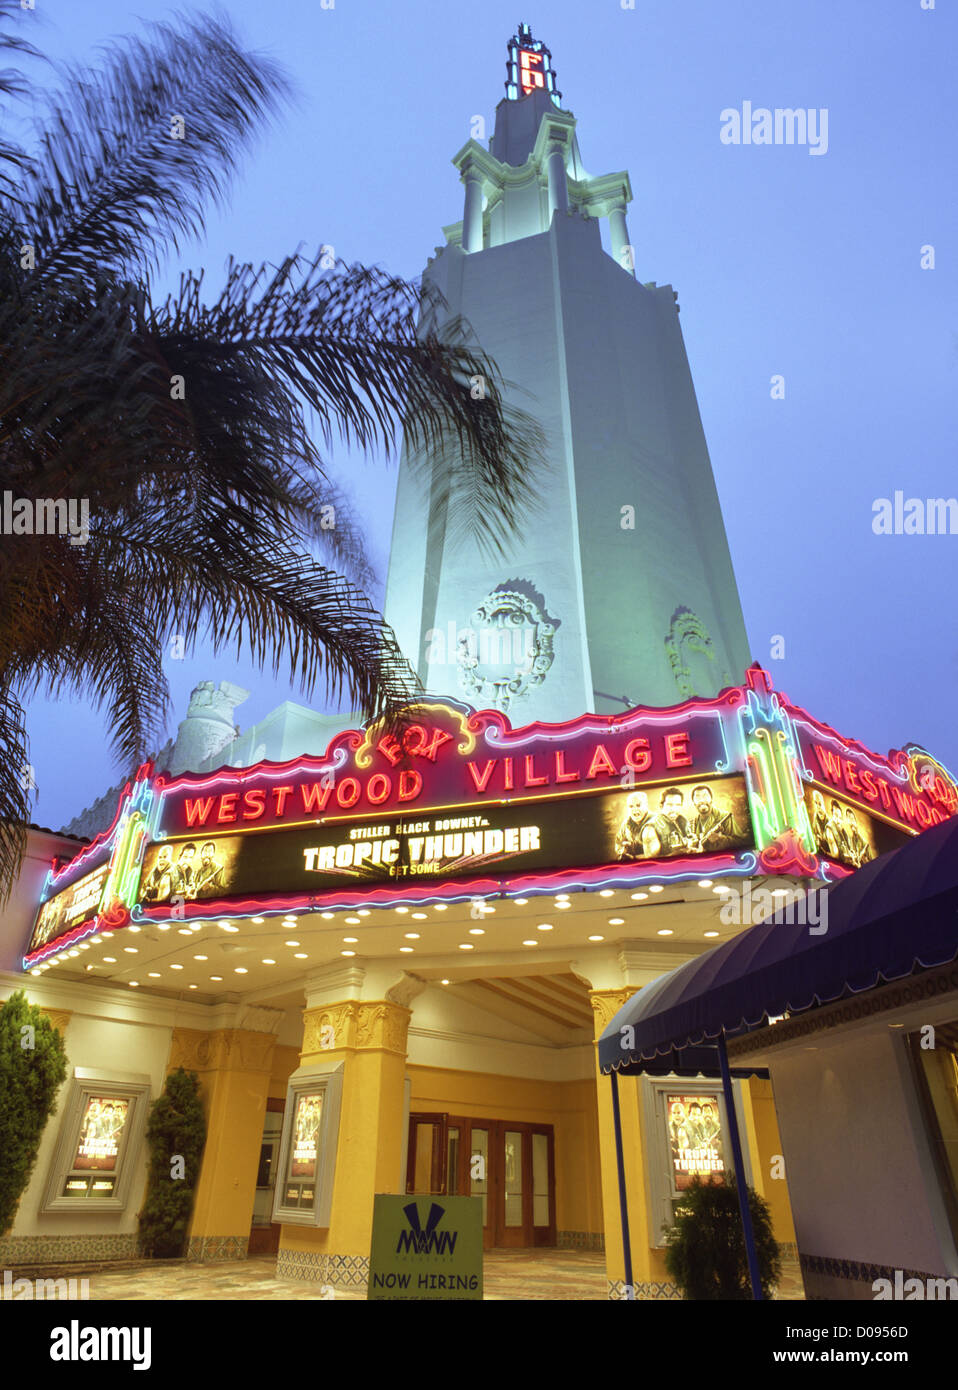 The Fox Theatre, Westwood Village, Los Angeles, Californis, at